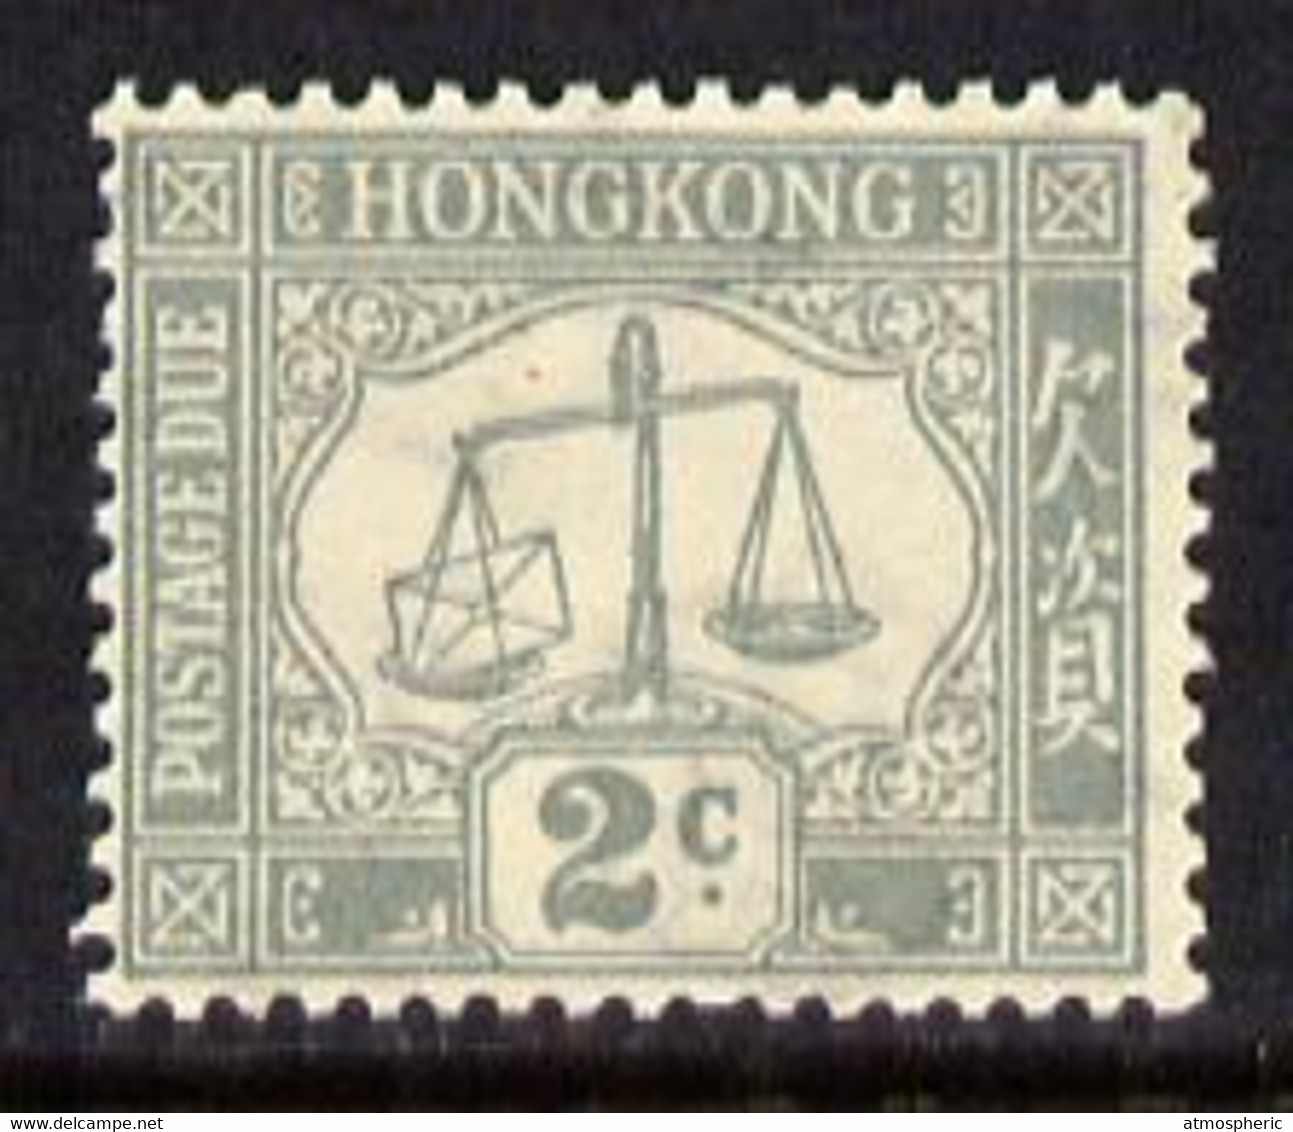 Hong Kong 1938-63 Postage Due 2c Grey On Ordinary Paper (Post Office Scales) U/M SG D6 - Unused Stamps